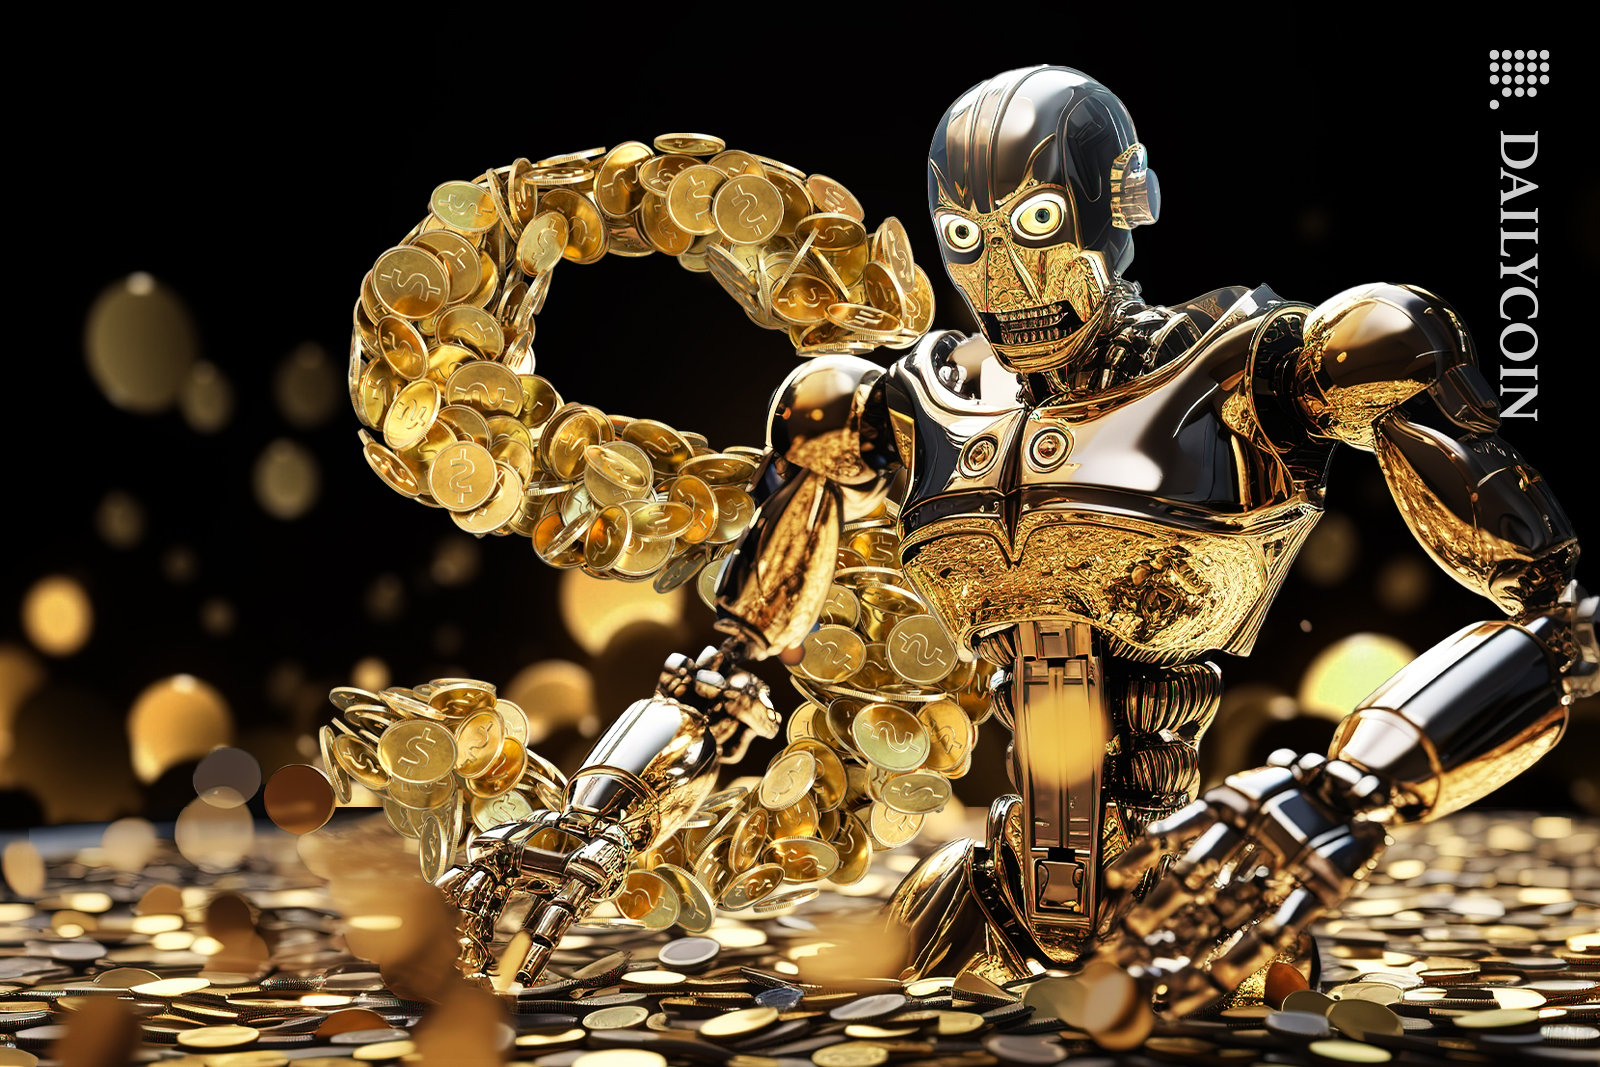 Robot swimming in stablecoins.